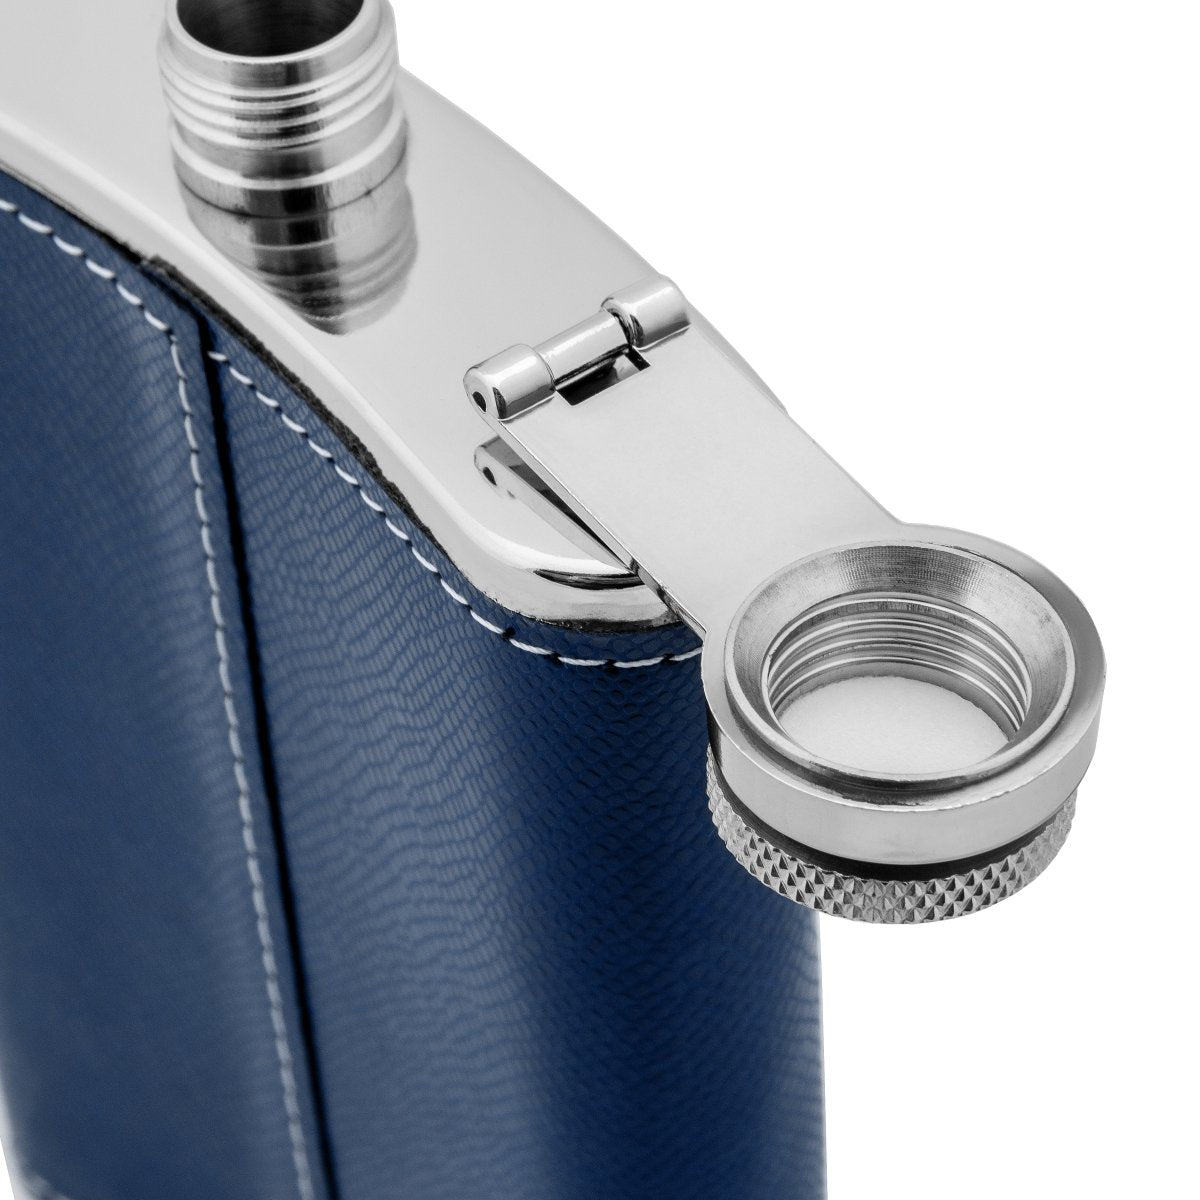 9 oz Blue Stainless Steel Hip Flask for Strong Alcohol Set of Four